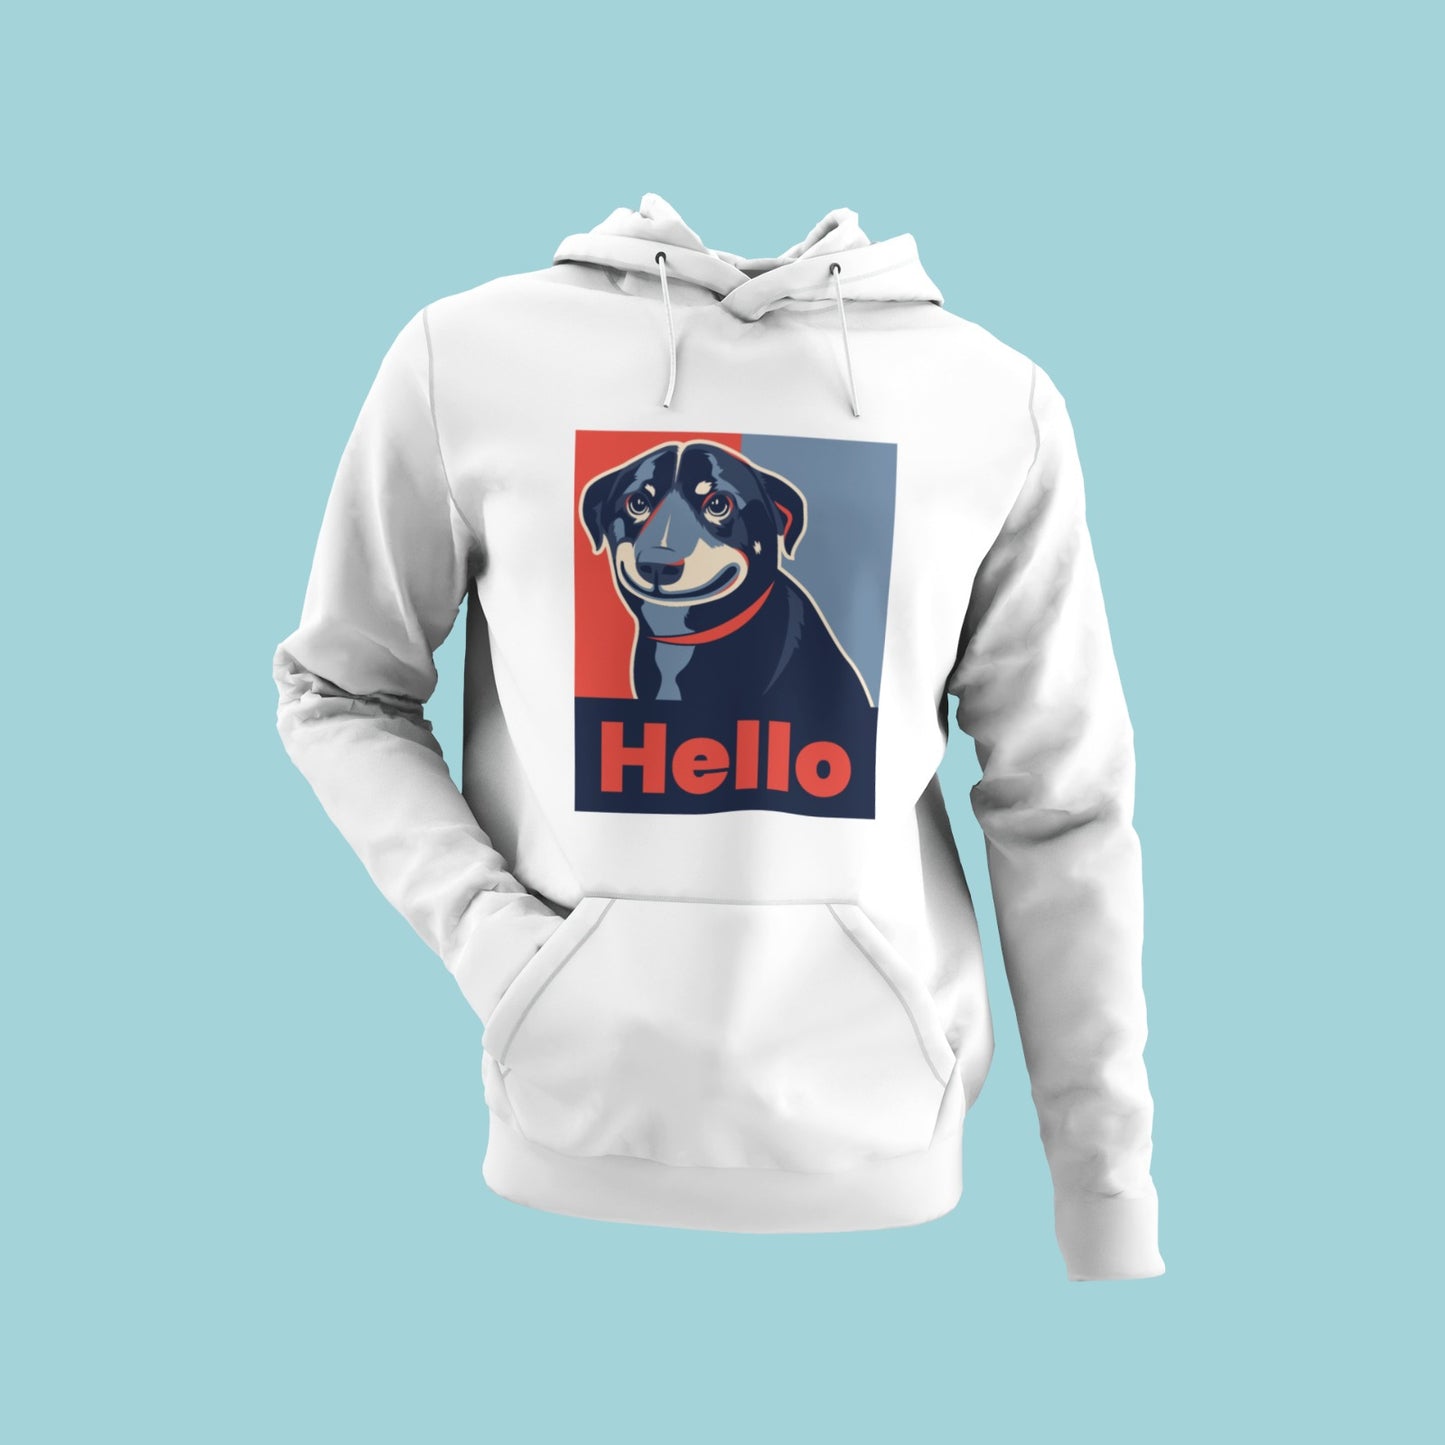  Make a statement with this white hoodie featuring a smiling Rottweiler in a striking red-blue dual-tone image and the word "hello". The comfortable material and unique design are perfect for dog lovers of all ages. Whether you're running errands or just hanging out at home, this hoodie is sure to turn heads. Order now and make a fashion statement that will never go unnoticed!